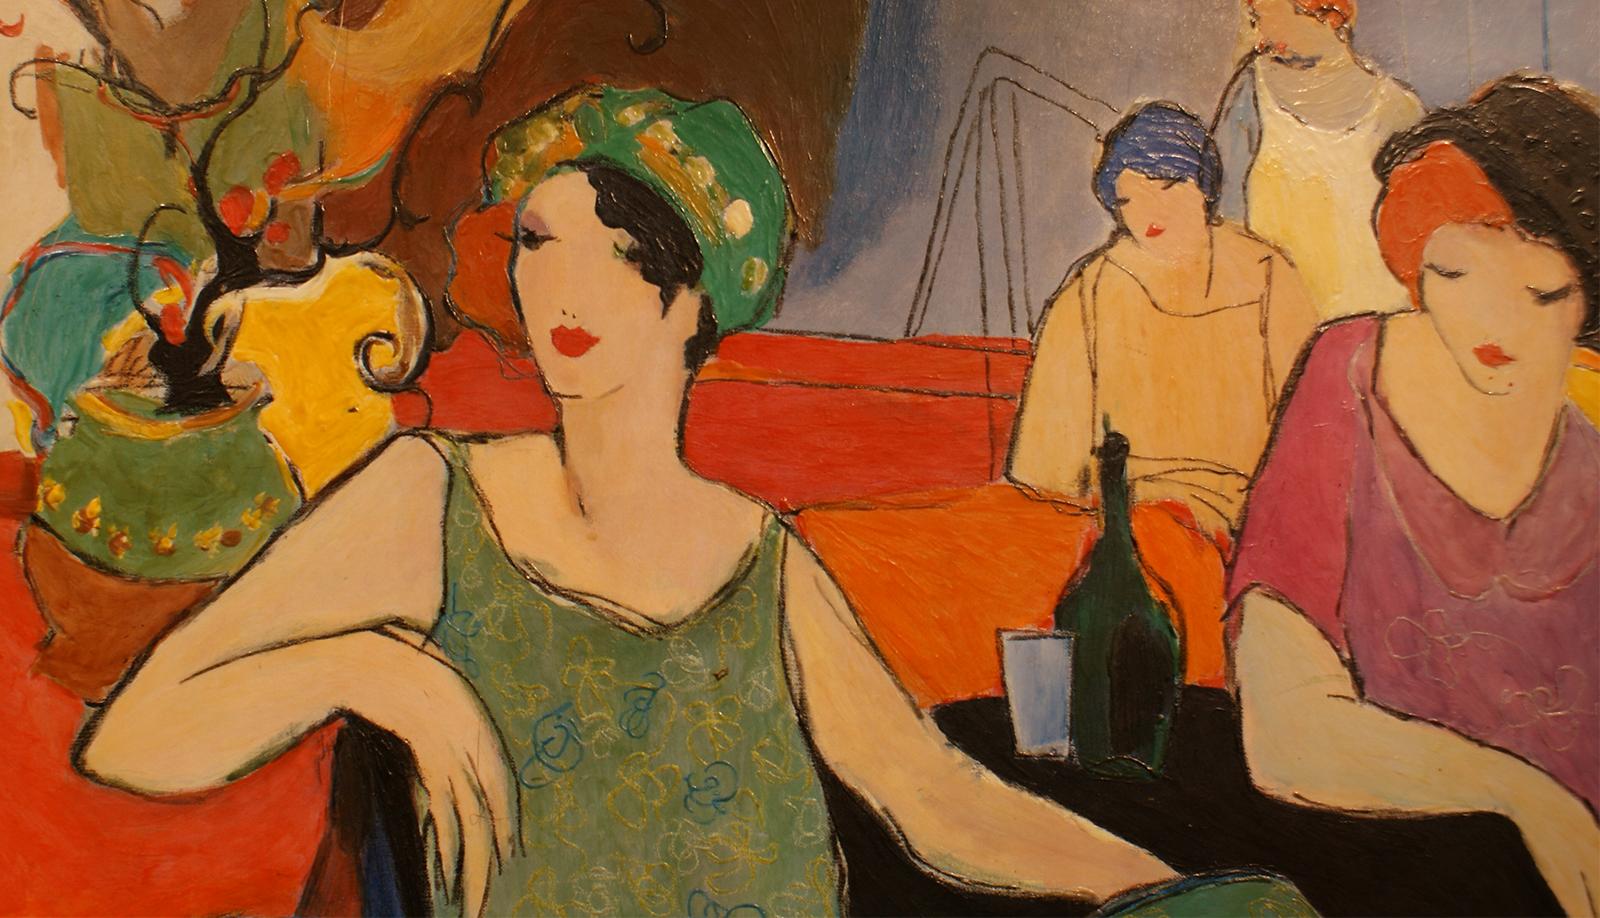 Original acrylic painting on canvas signed by Itzchak Tarkay (1935-2012), despicting women in a cafe with vibrant colors, inspired by the post impressionist movement.
Itzchak Tarkay is considered to be a key figure in the modern figurative movement